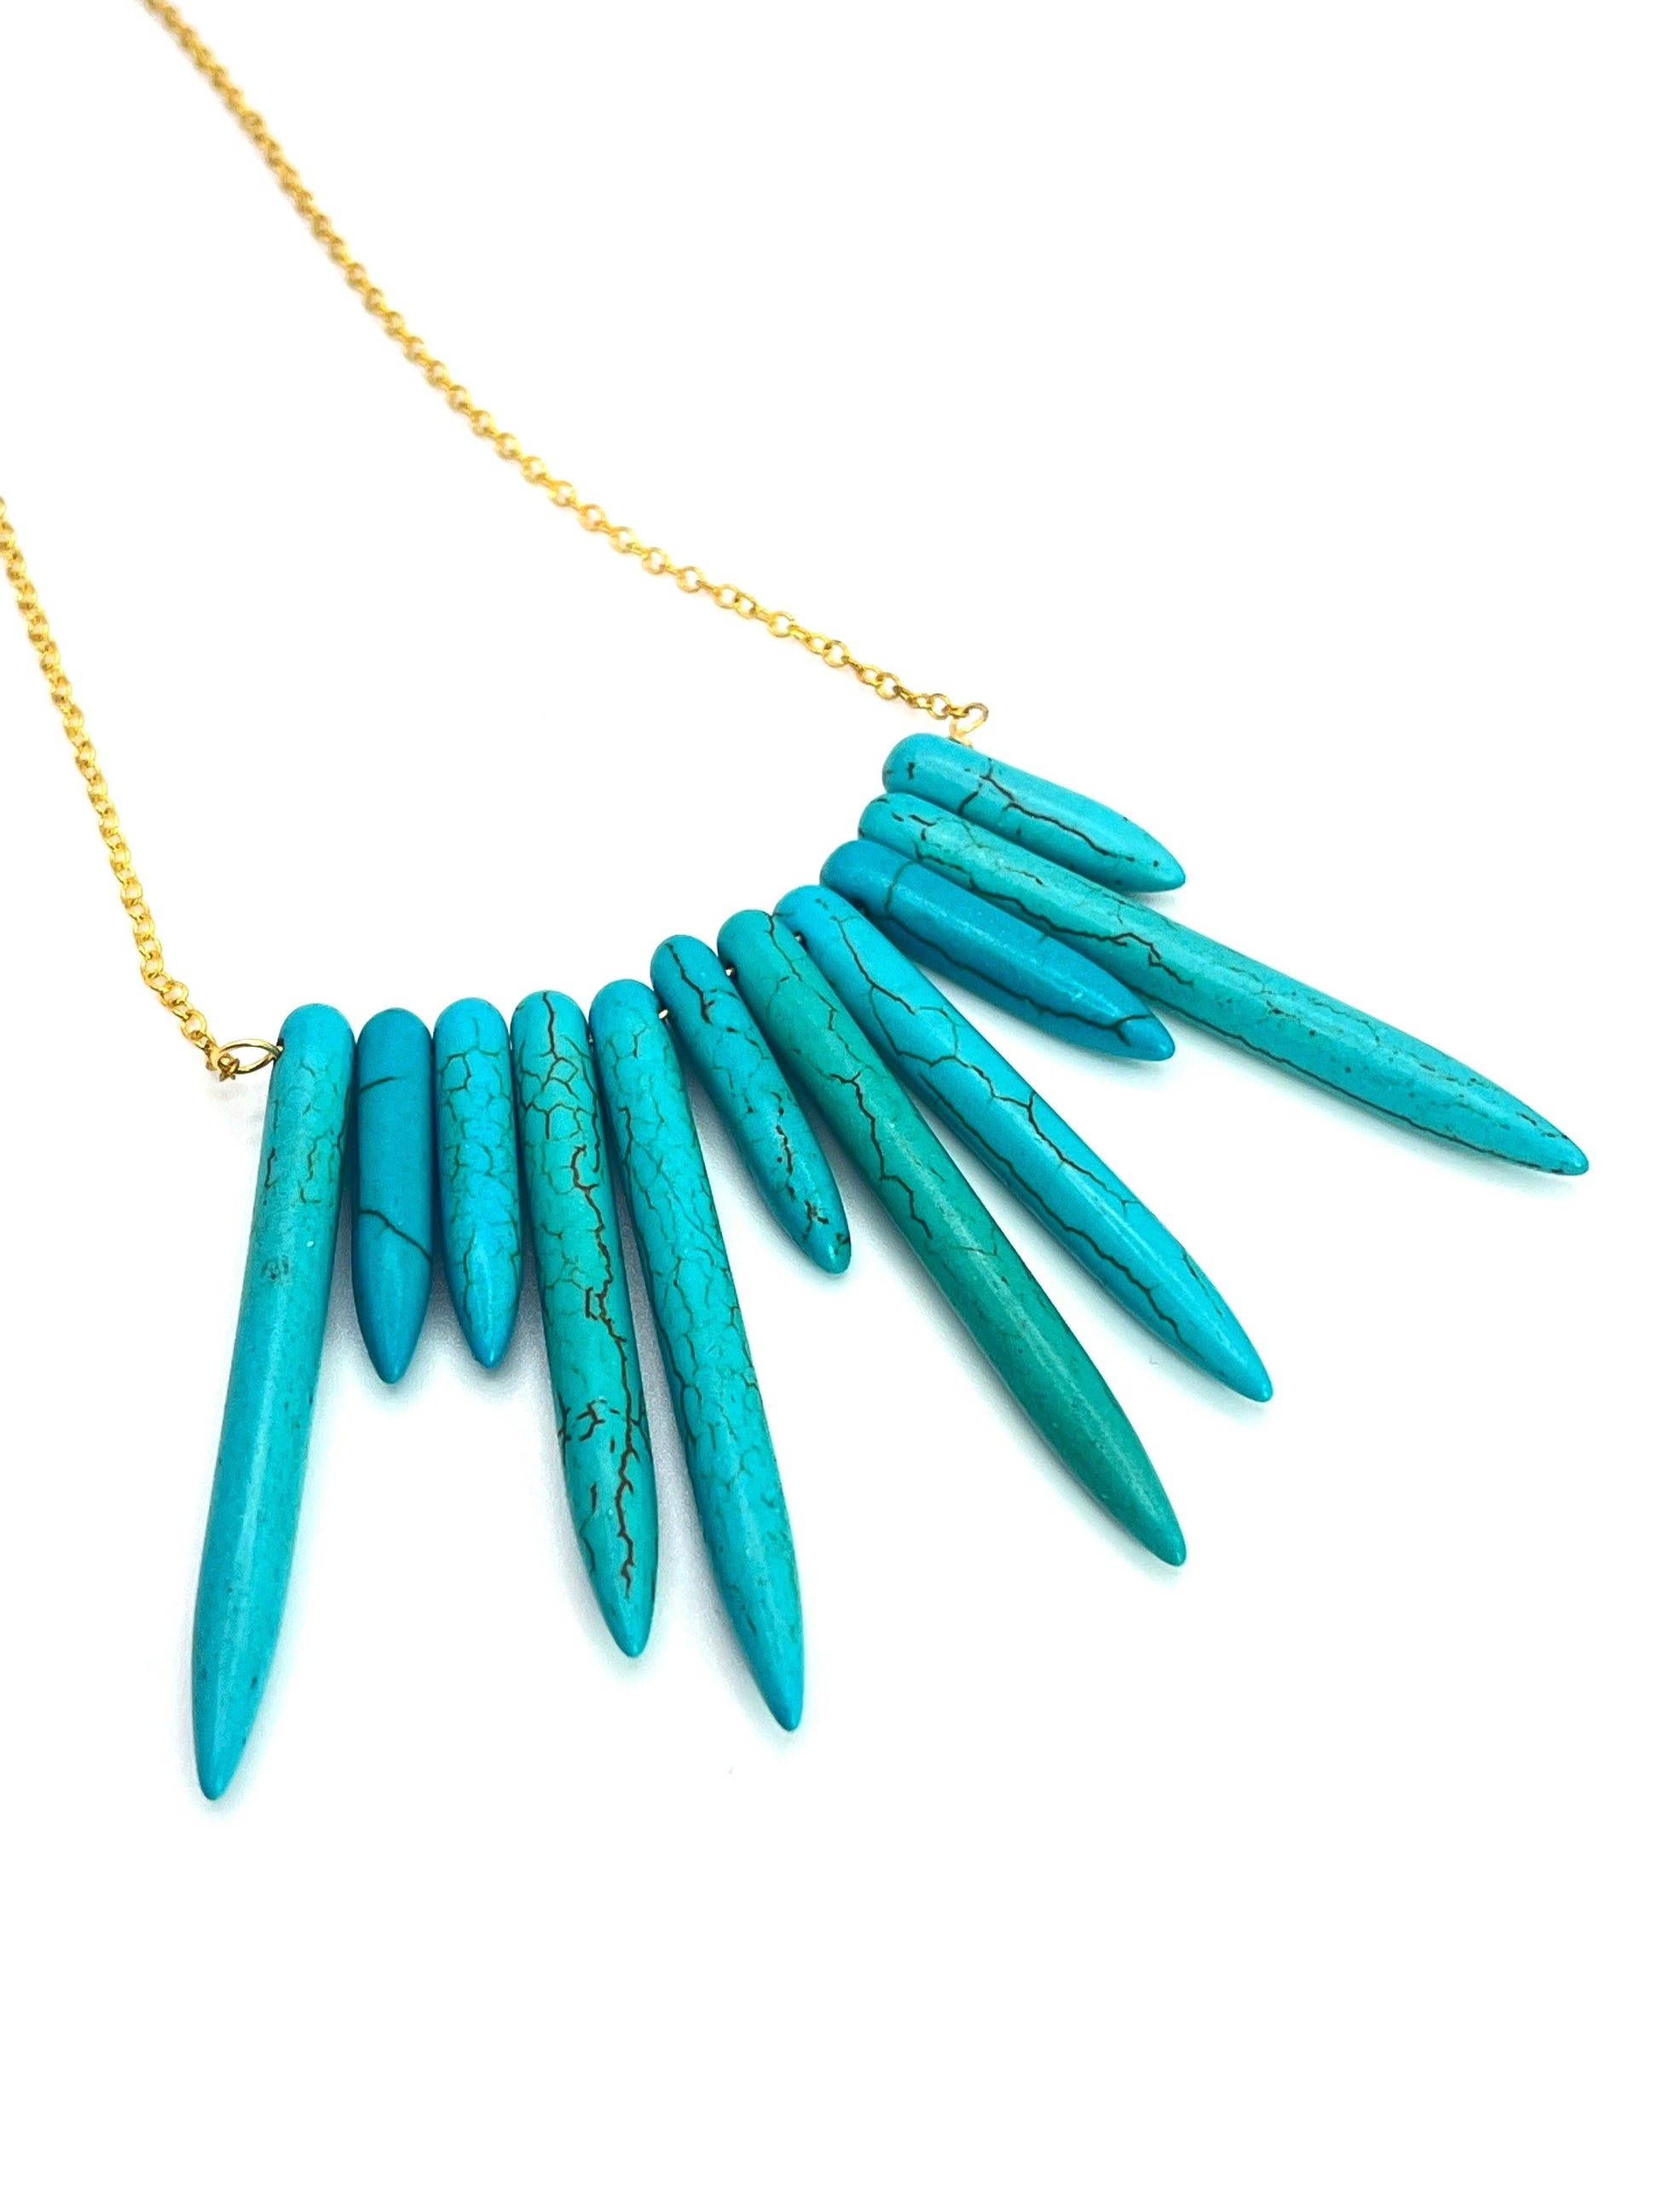 Turquoise Necklace - Kybalion Jewellery